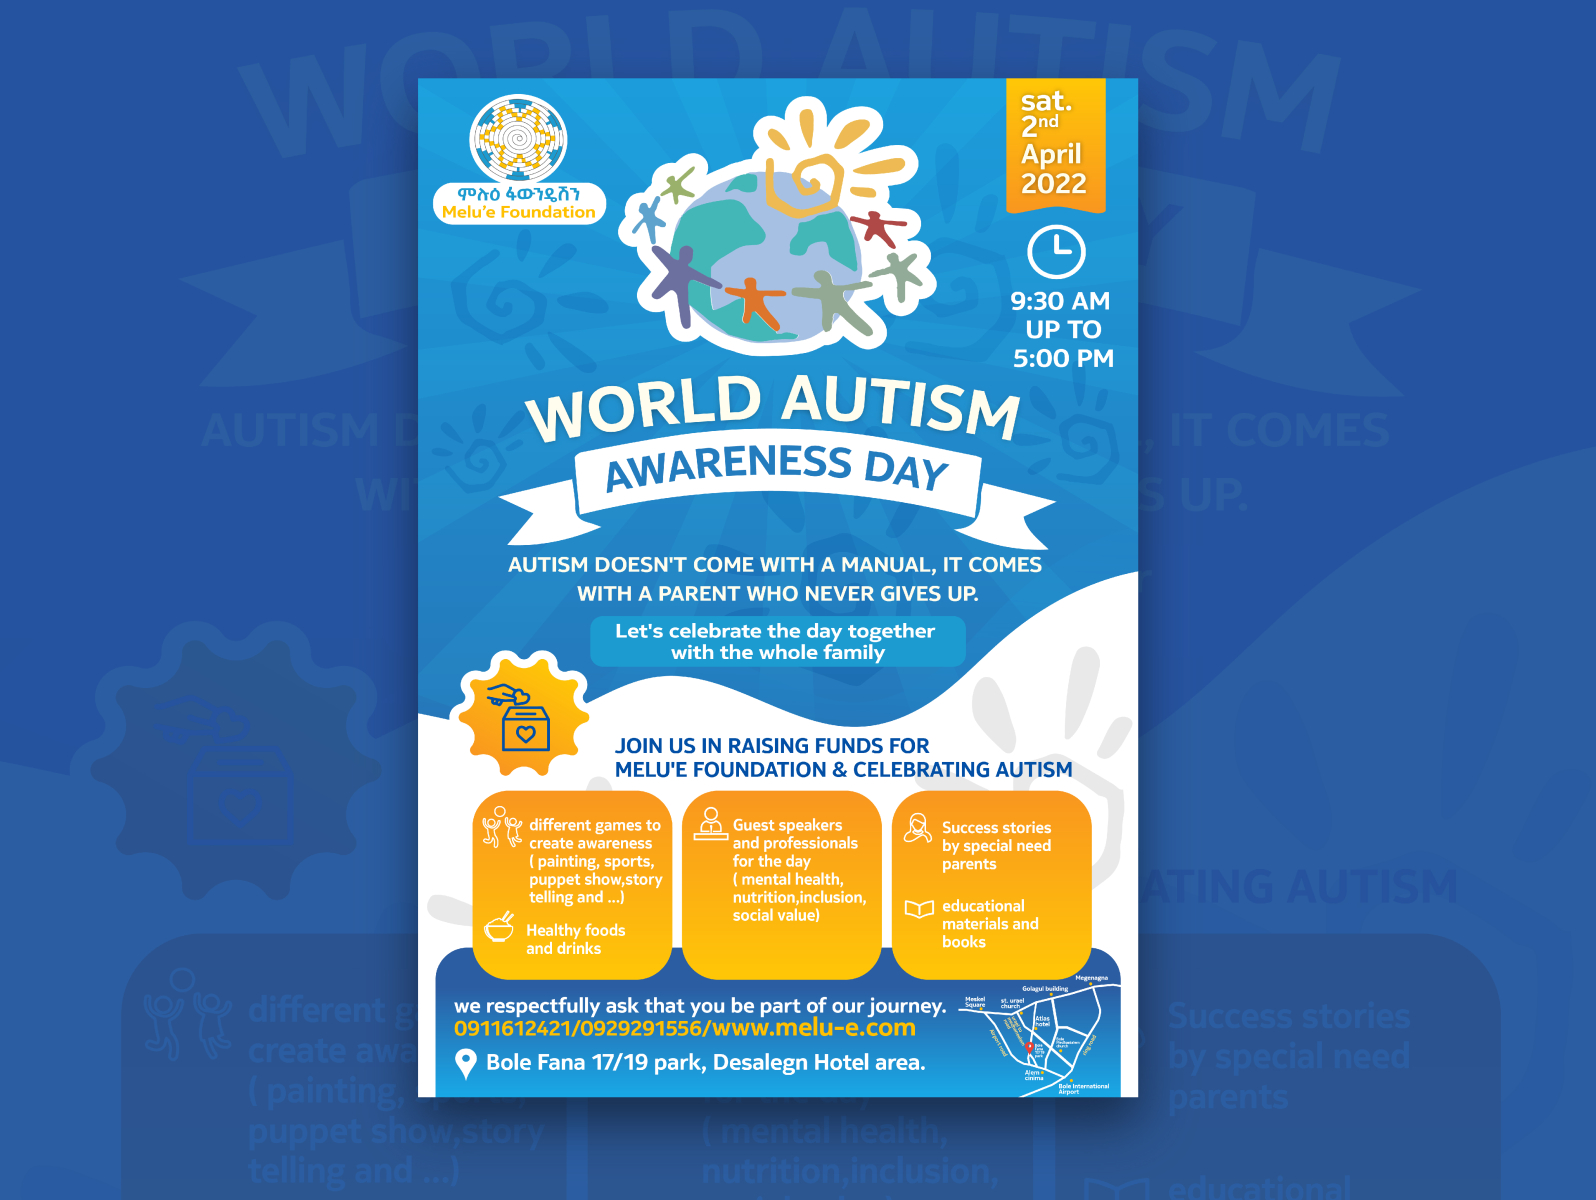 Autism awareness day poster by Nahom Shiferaw on Dribbble